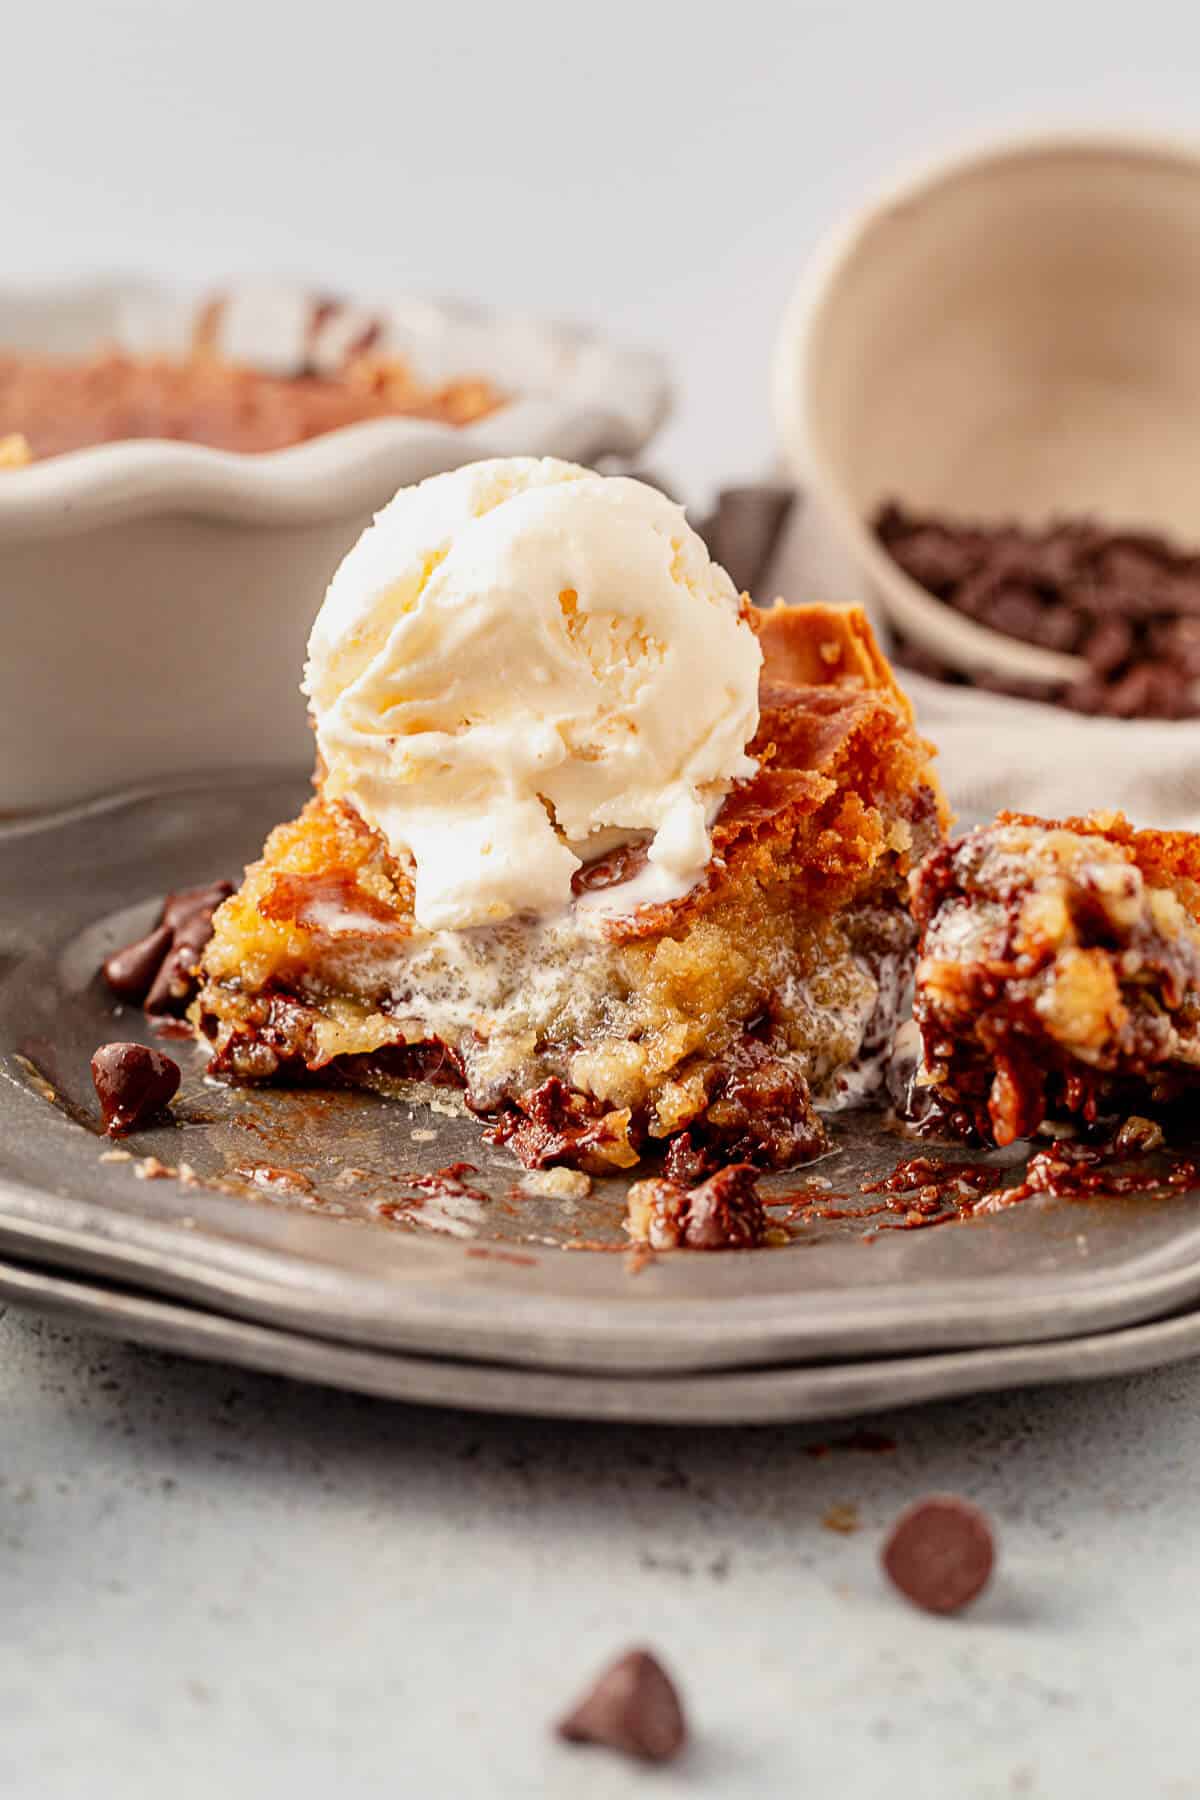 a piece of chocolate chip pie and ice cream on a plate with a bite out of it